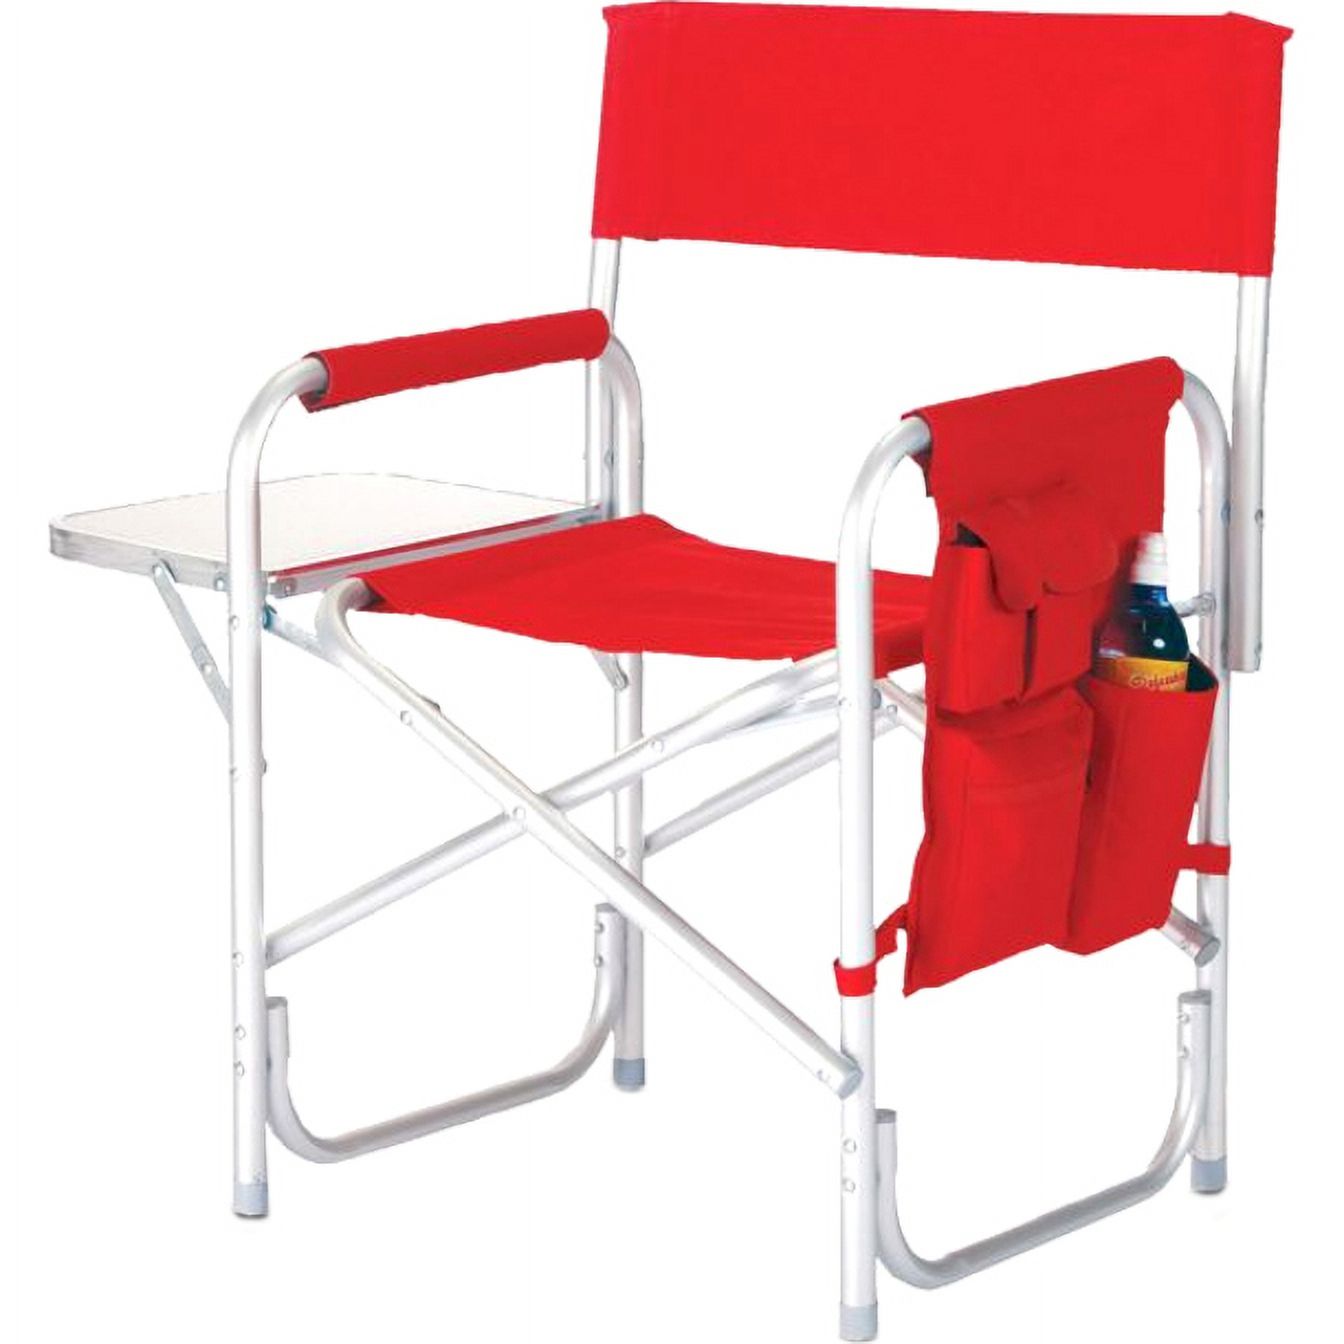 Picnic Plus Director's Sport Chair - image 1 of 2